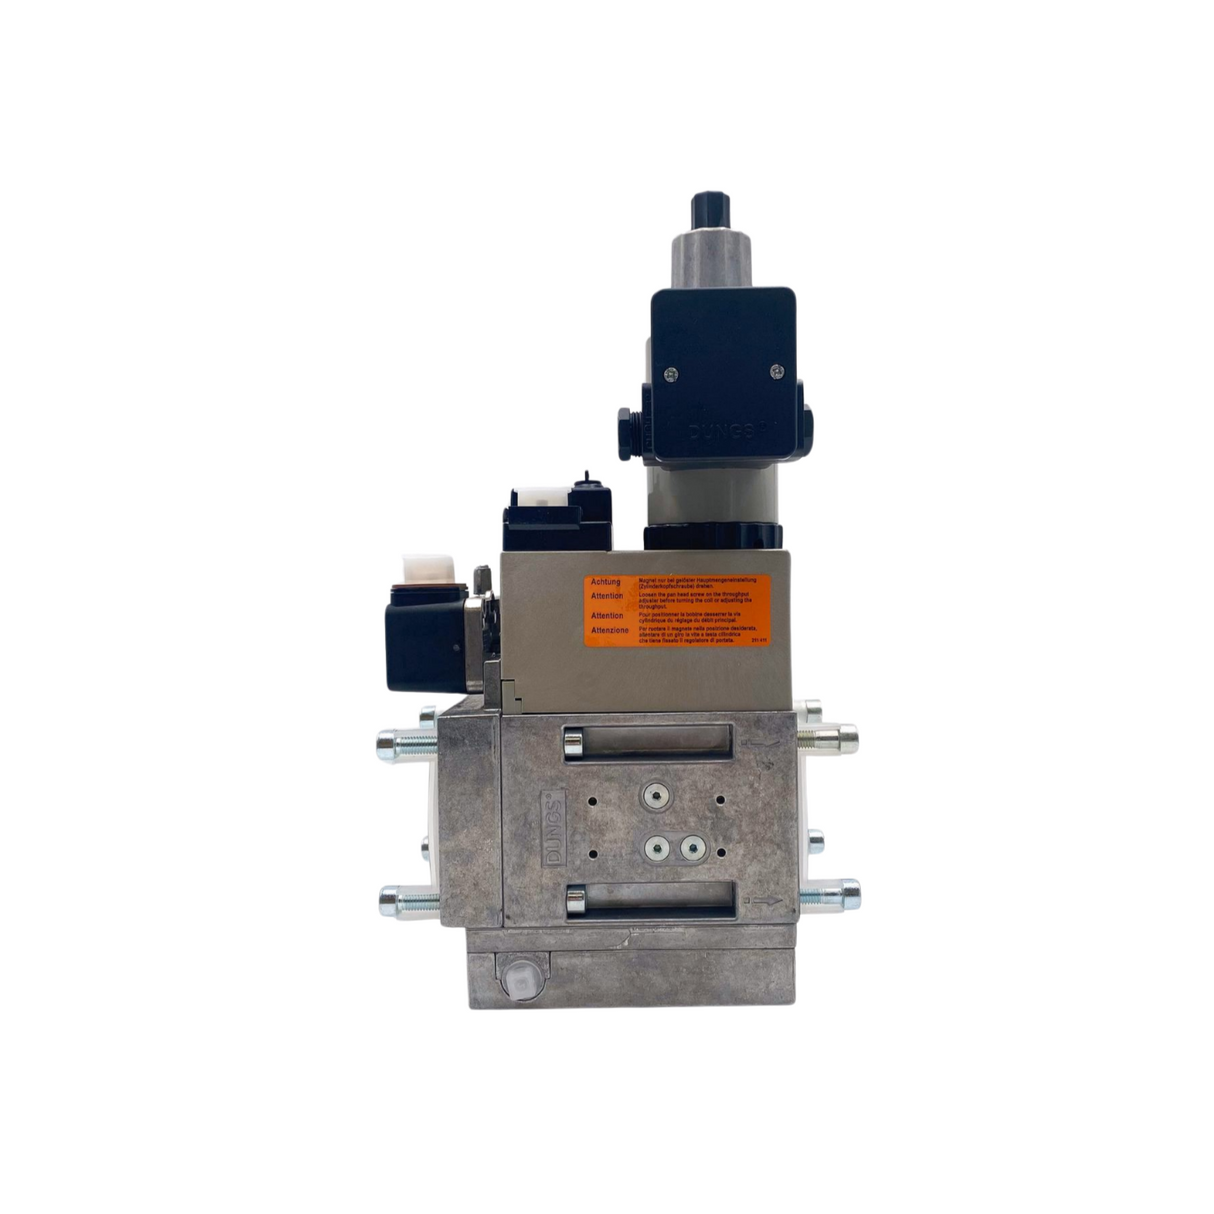 Dungs MB-ZRDLE 415 B01 S22 + GW50 A5 Multibloc Gas Valve - 230v